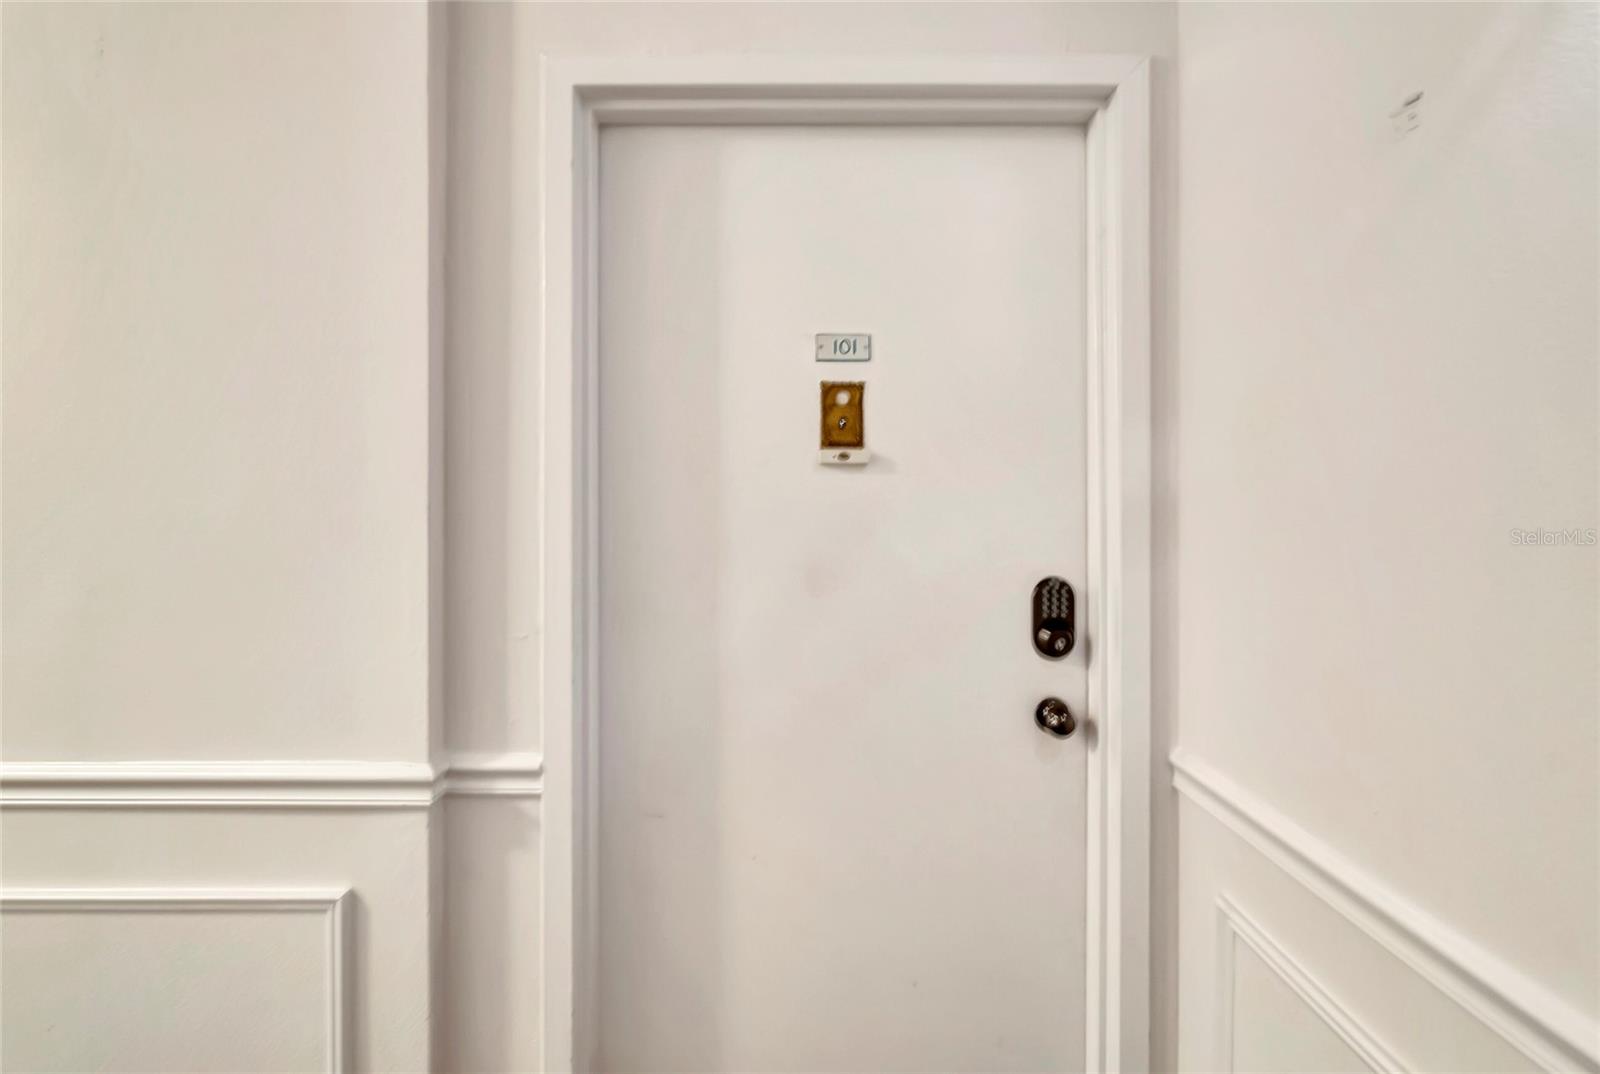 Picture the welcoming front door of our condo unit, standing proudly within the vibrant community.